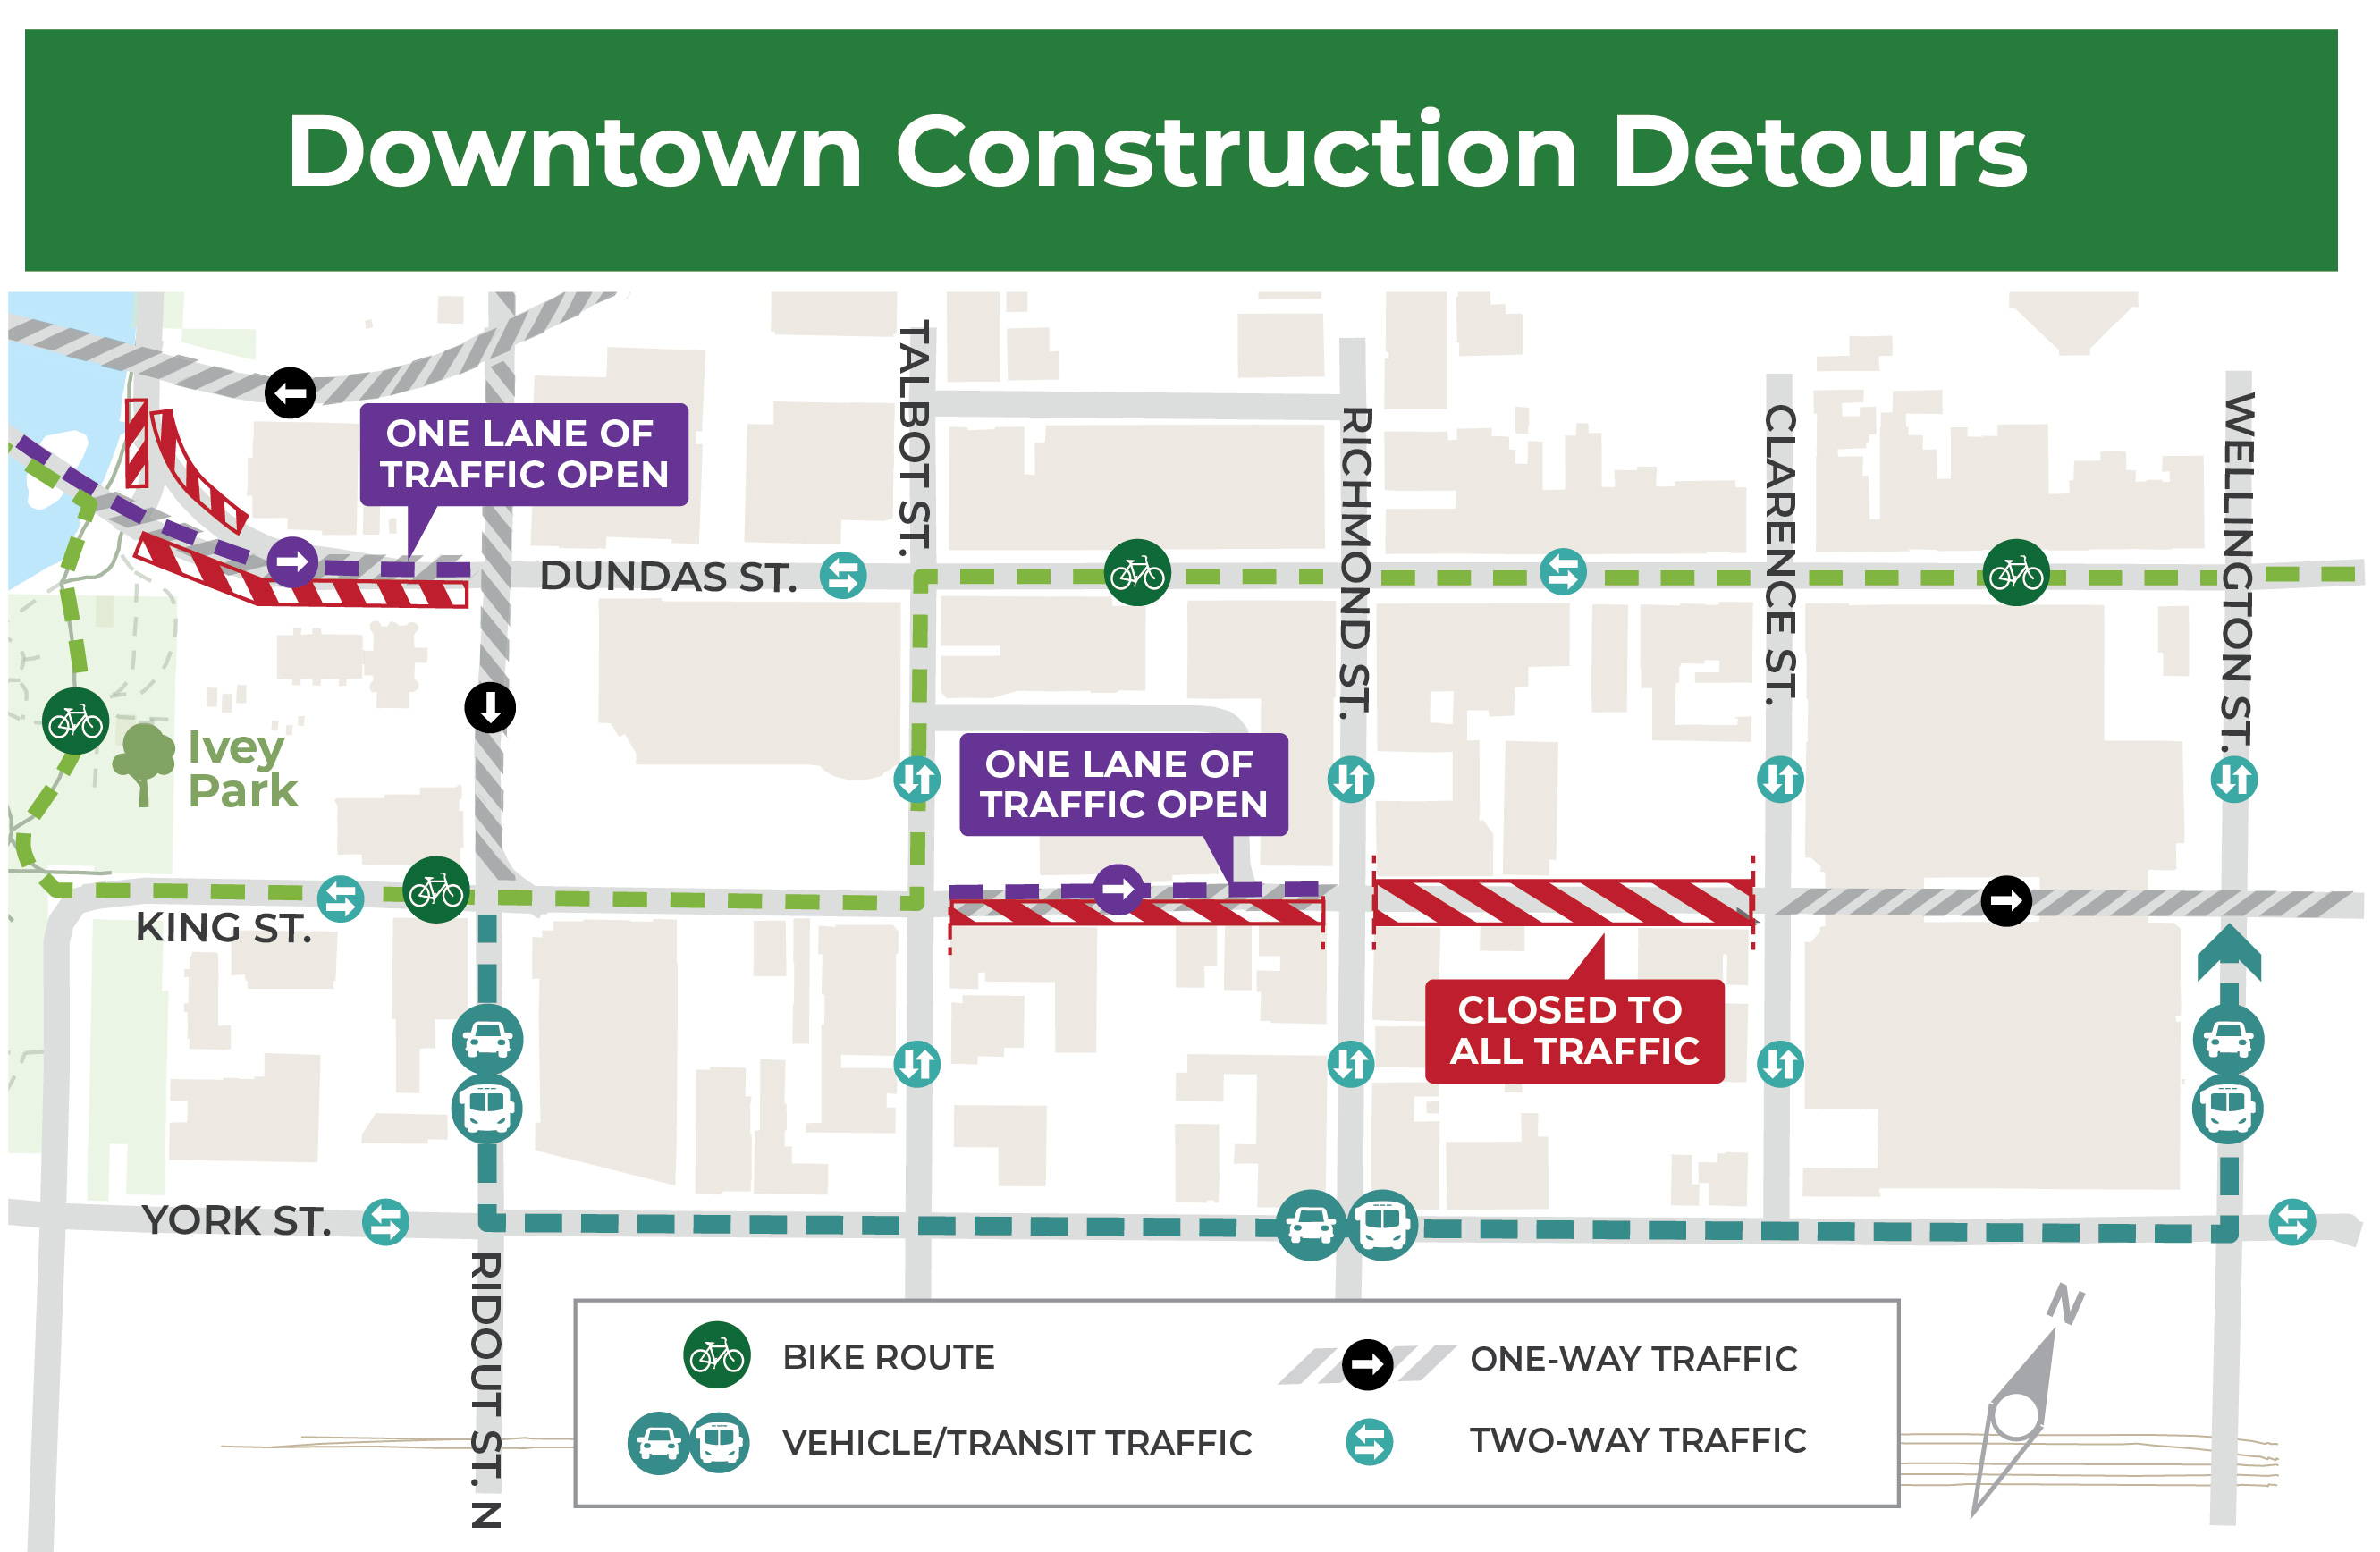 A map of downtown construction detours. For more information, please contact Jaden Hodgins at jhodgins@london.ca or by calling 519-661-2489 x 4074